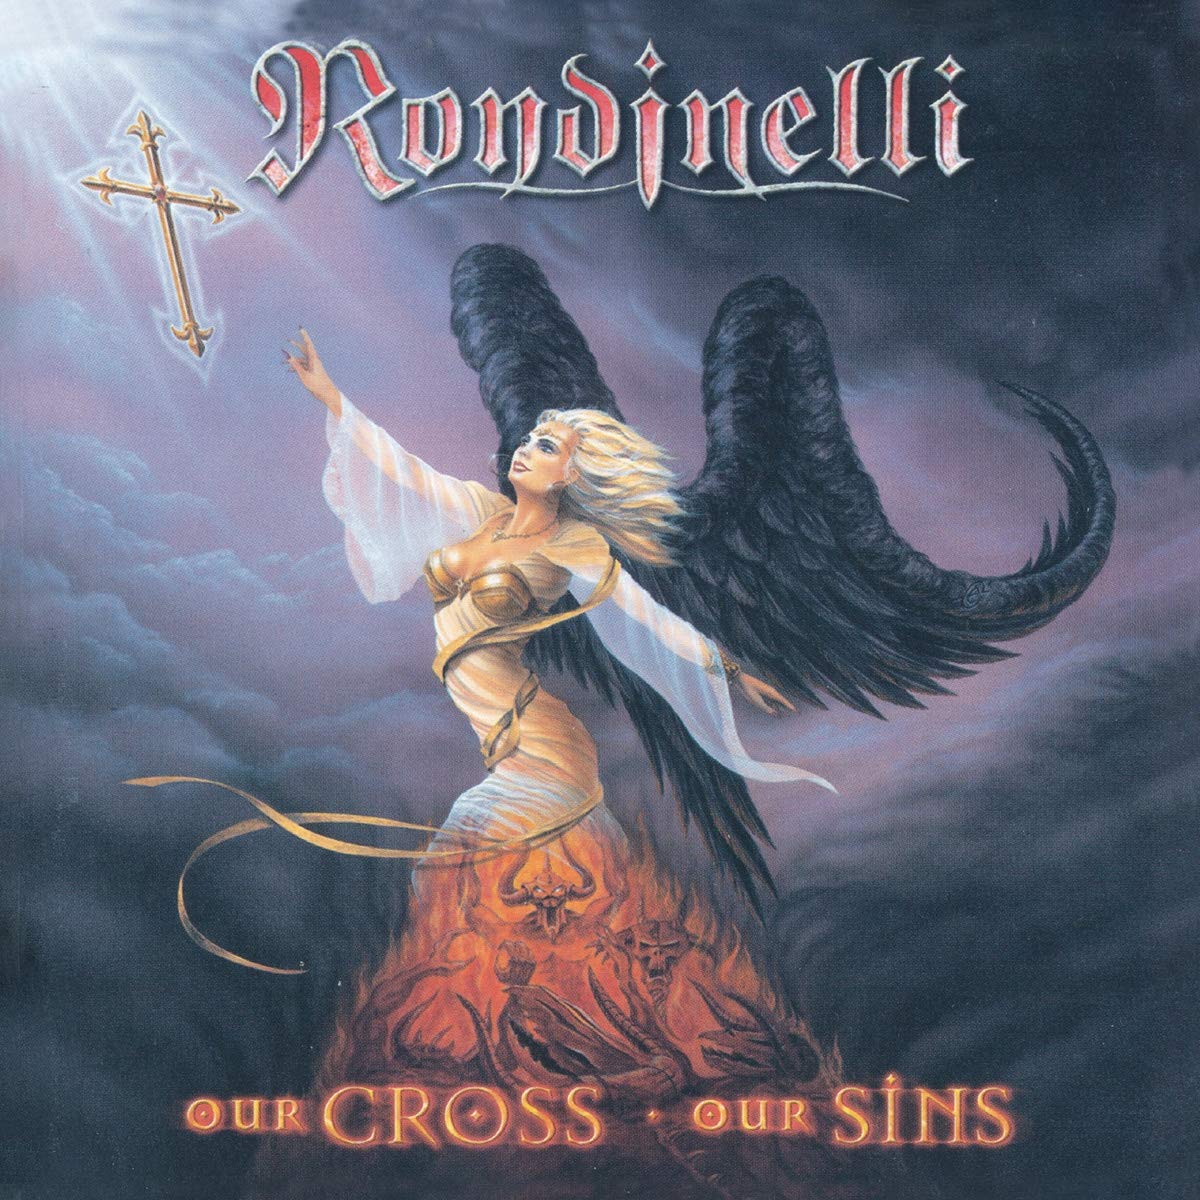 Rondinelli- Our Cross, Our Sins